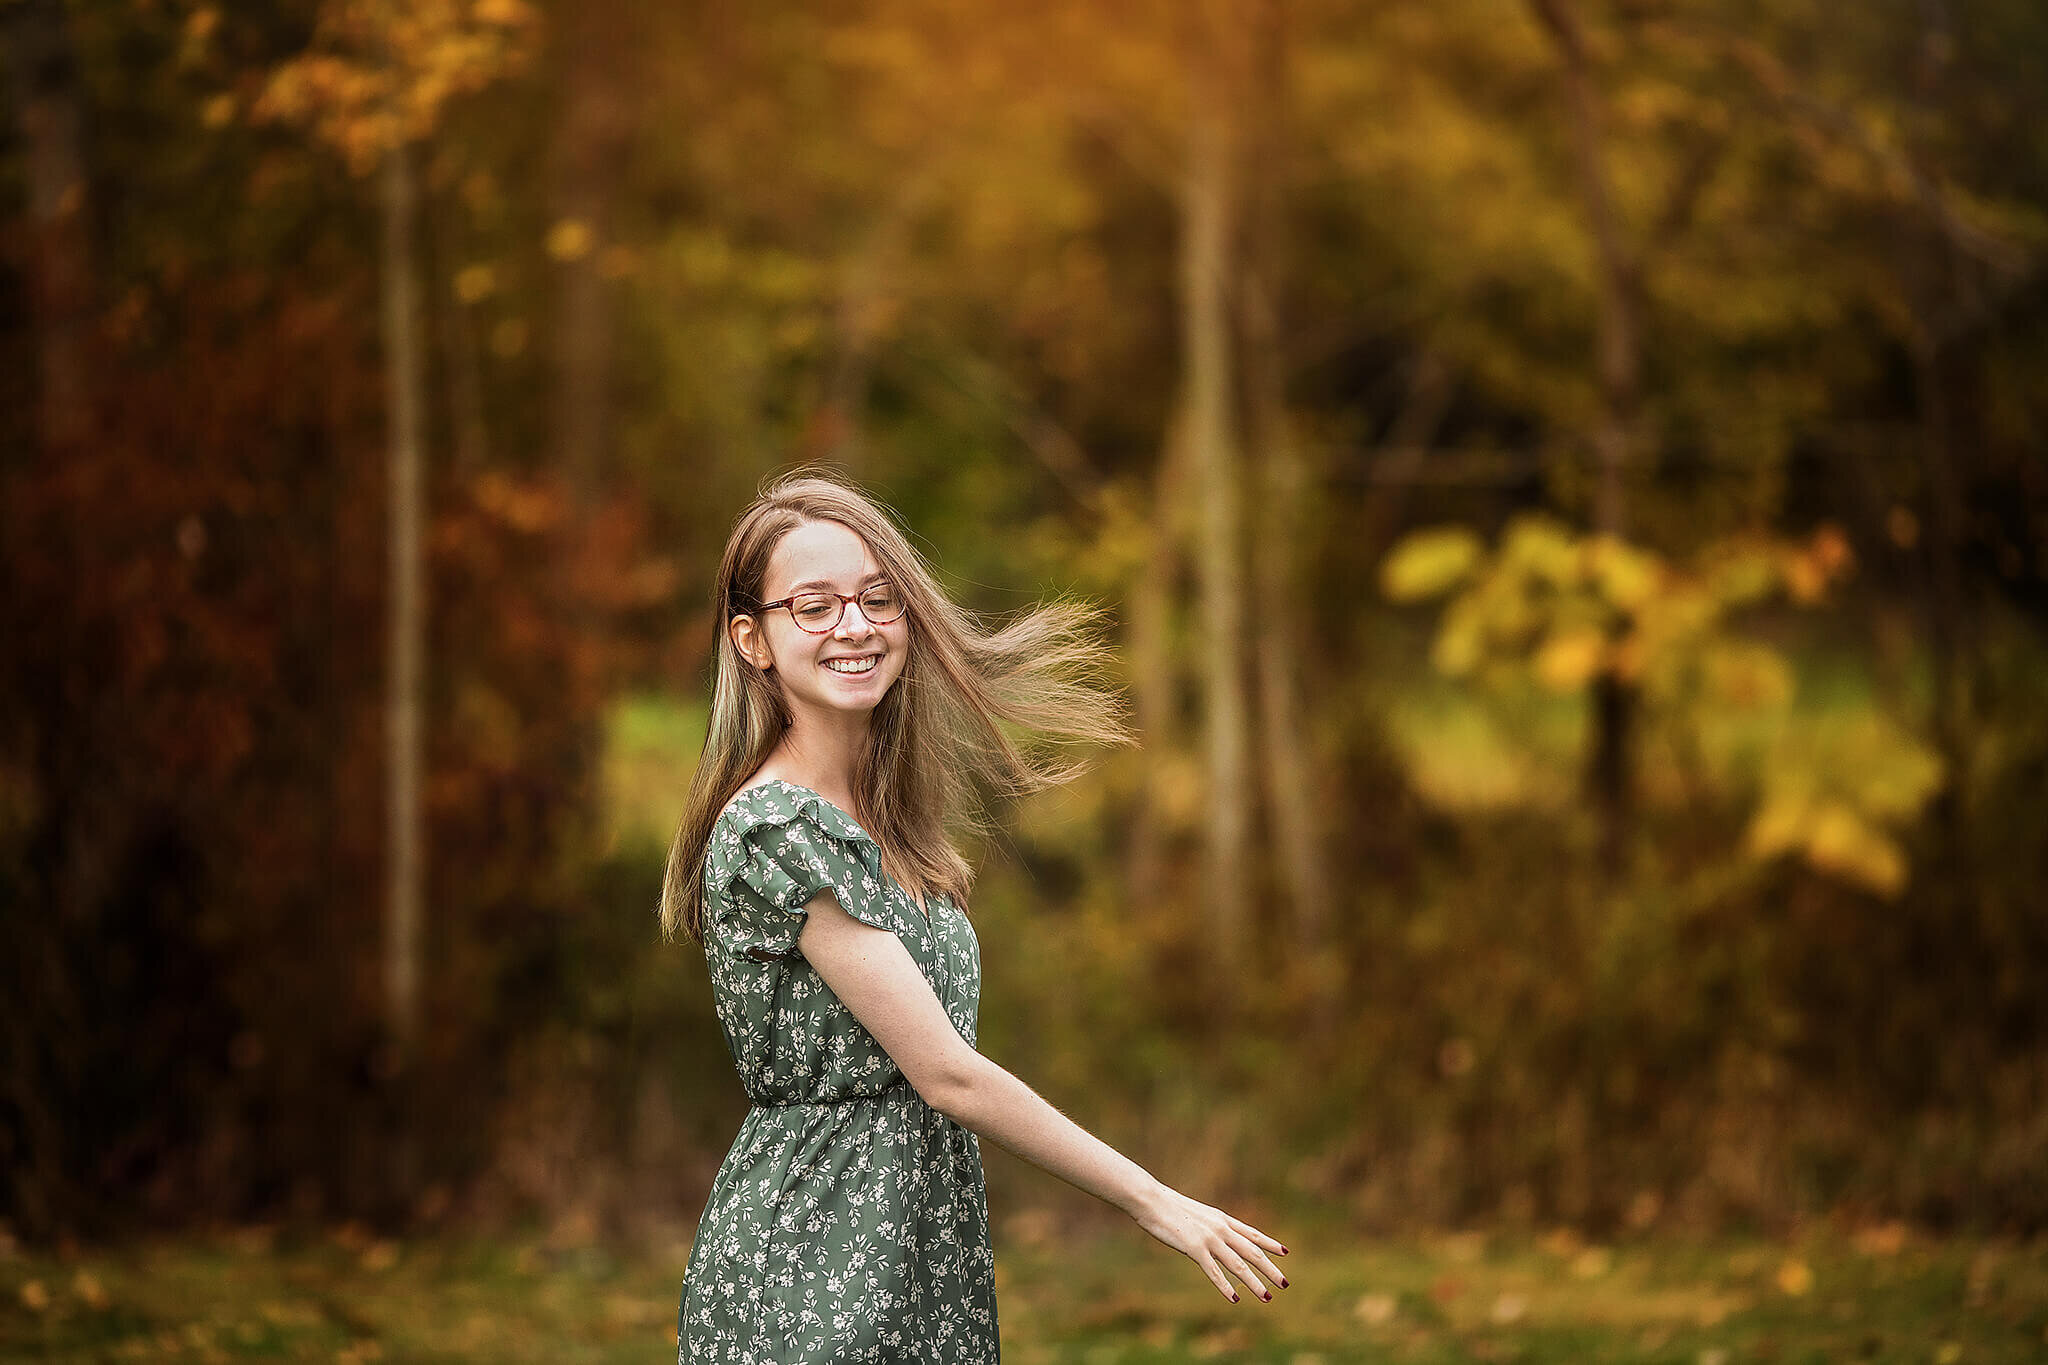 marion ohio high school senior twirling in front of the woods wearing a green and white dress